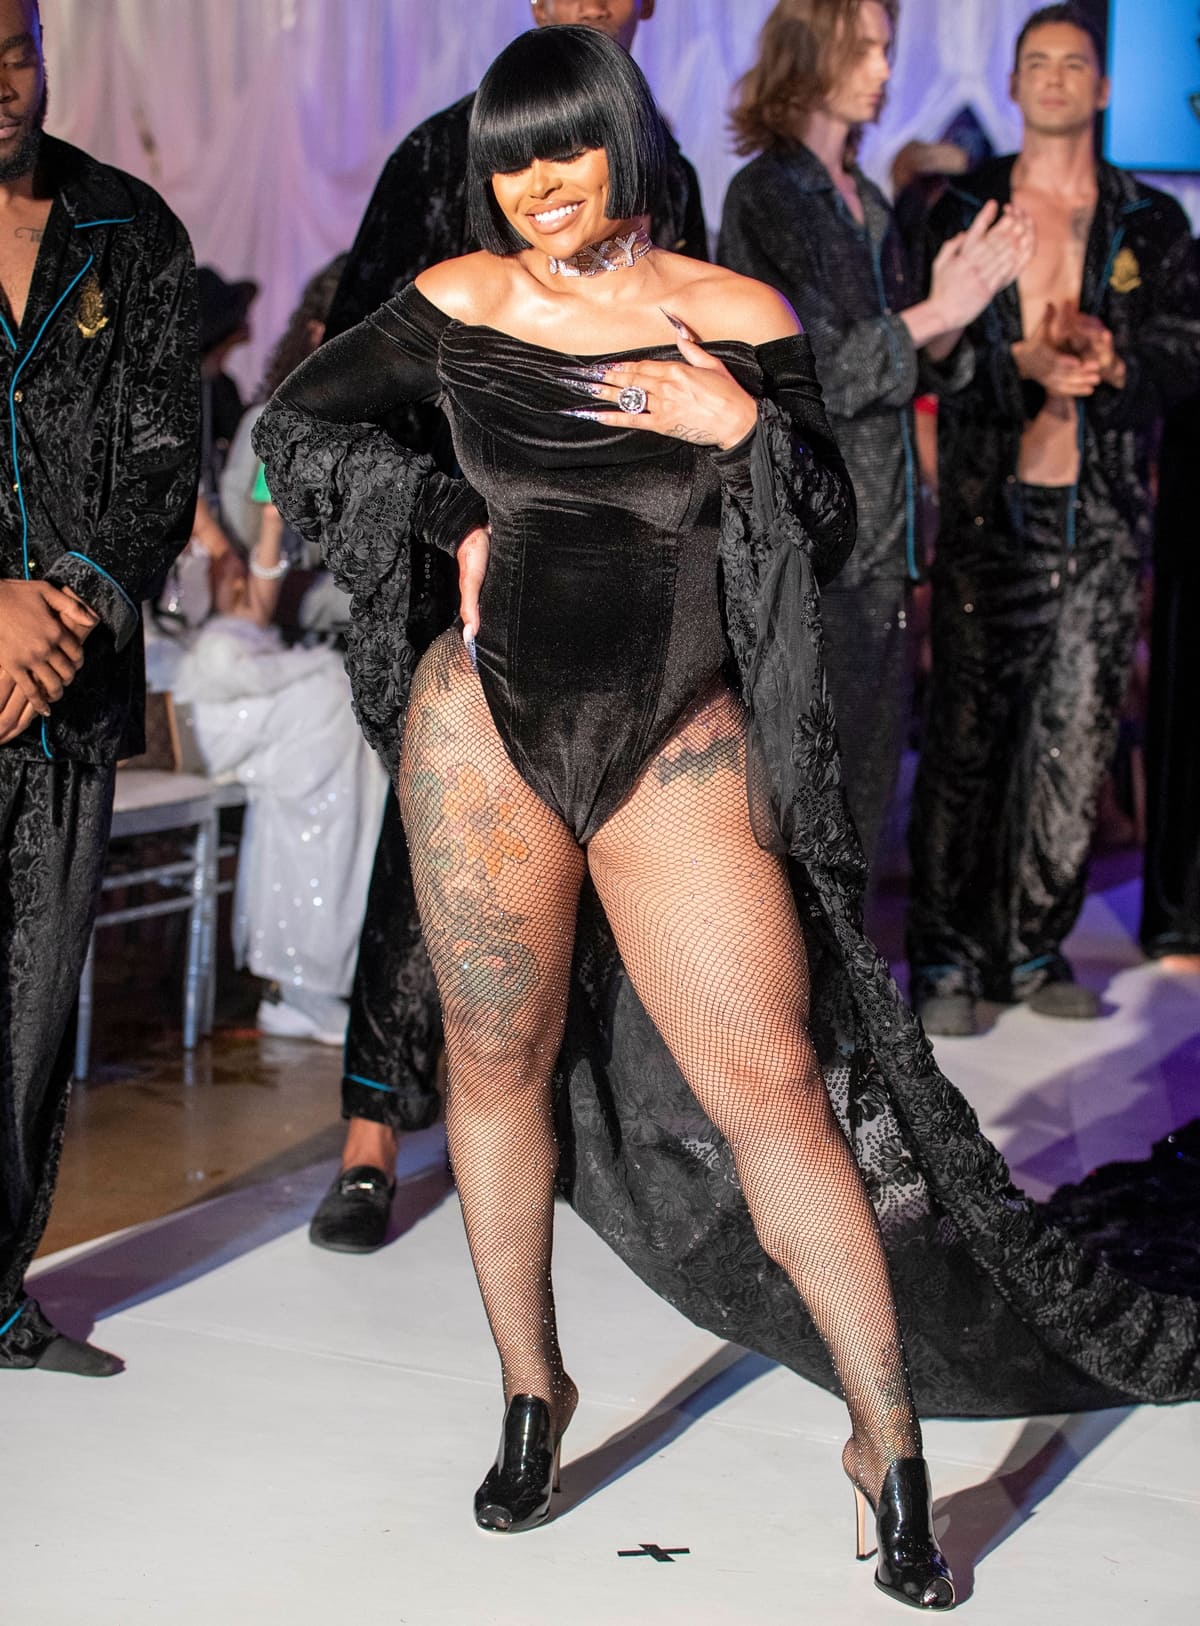 Model Blac Chyna flaunts her legs at the 'LA Fashion Week' Glamour And Style edition at Don Quixote